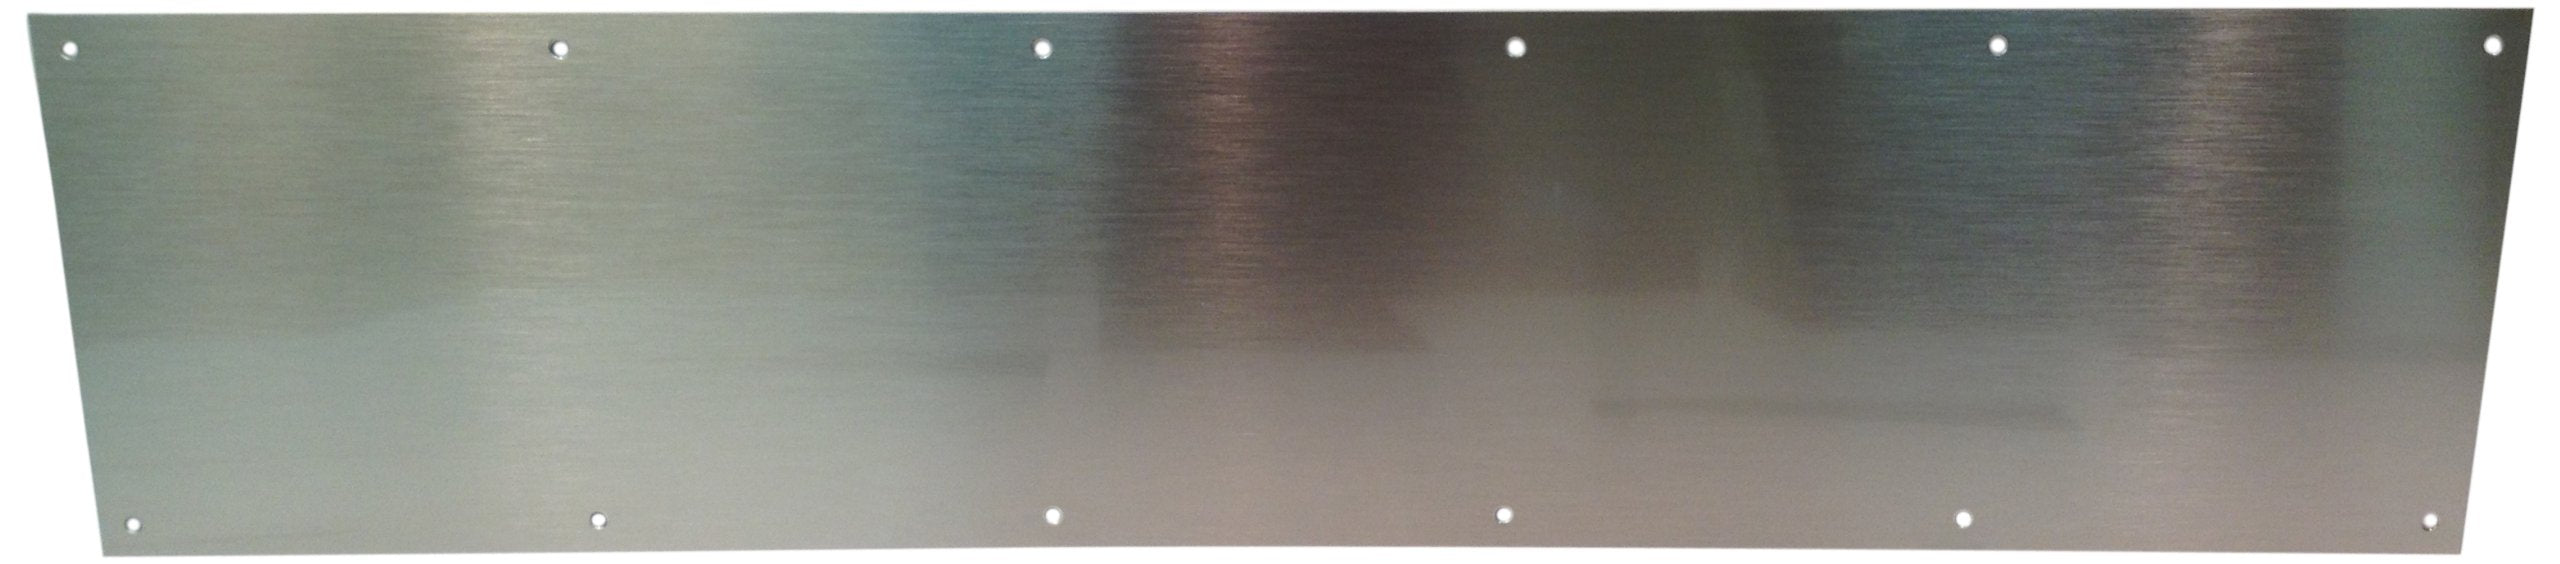 Metal Kick Plate Satin Stainless Steel Finish 8mm Thick